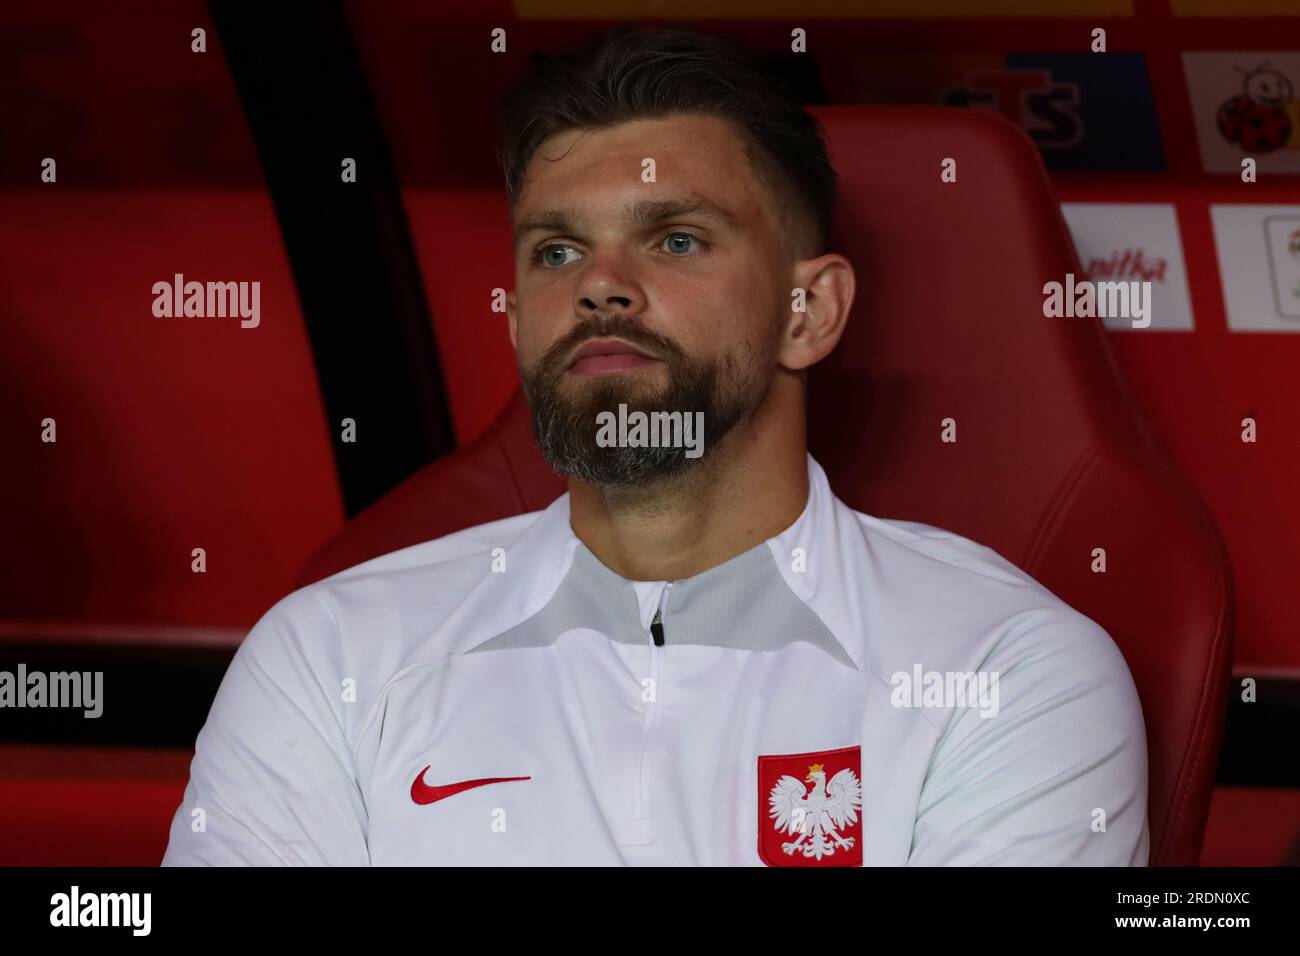 Bartlomiej Dragowski of Poland seen during the Friendly match between Poland and Germany at PEG Narodowy. Final score: Poland 1:0 Germany. Stock Photo